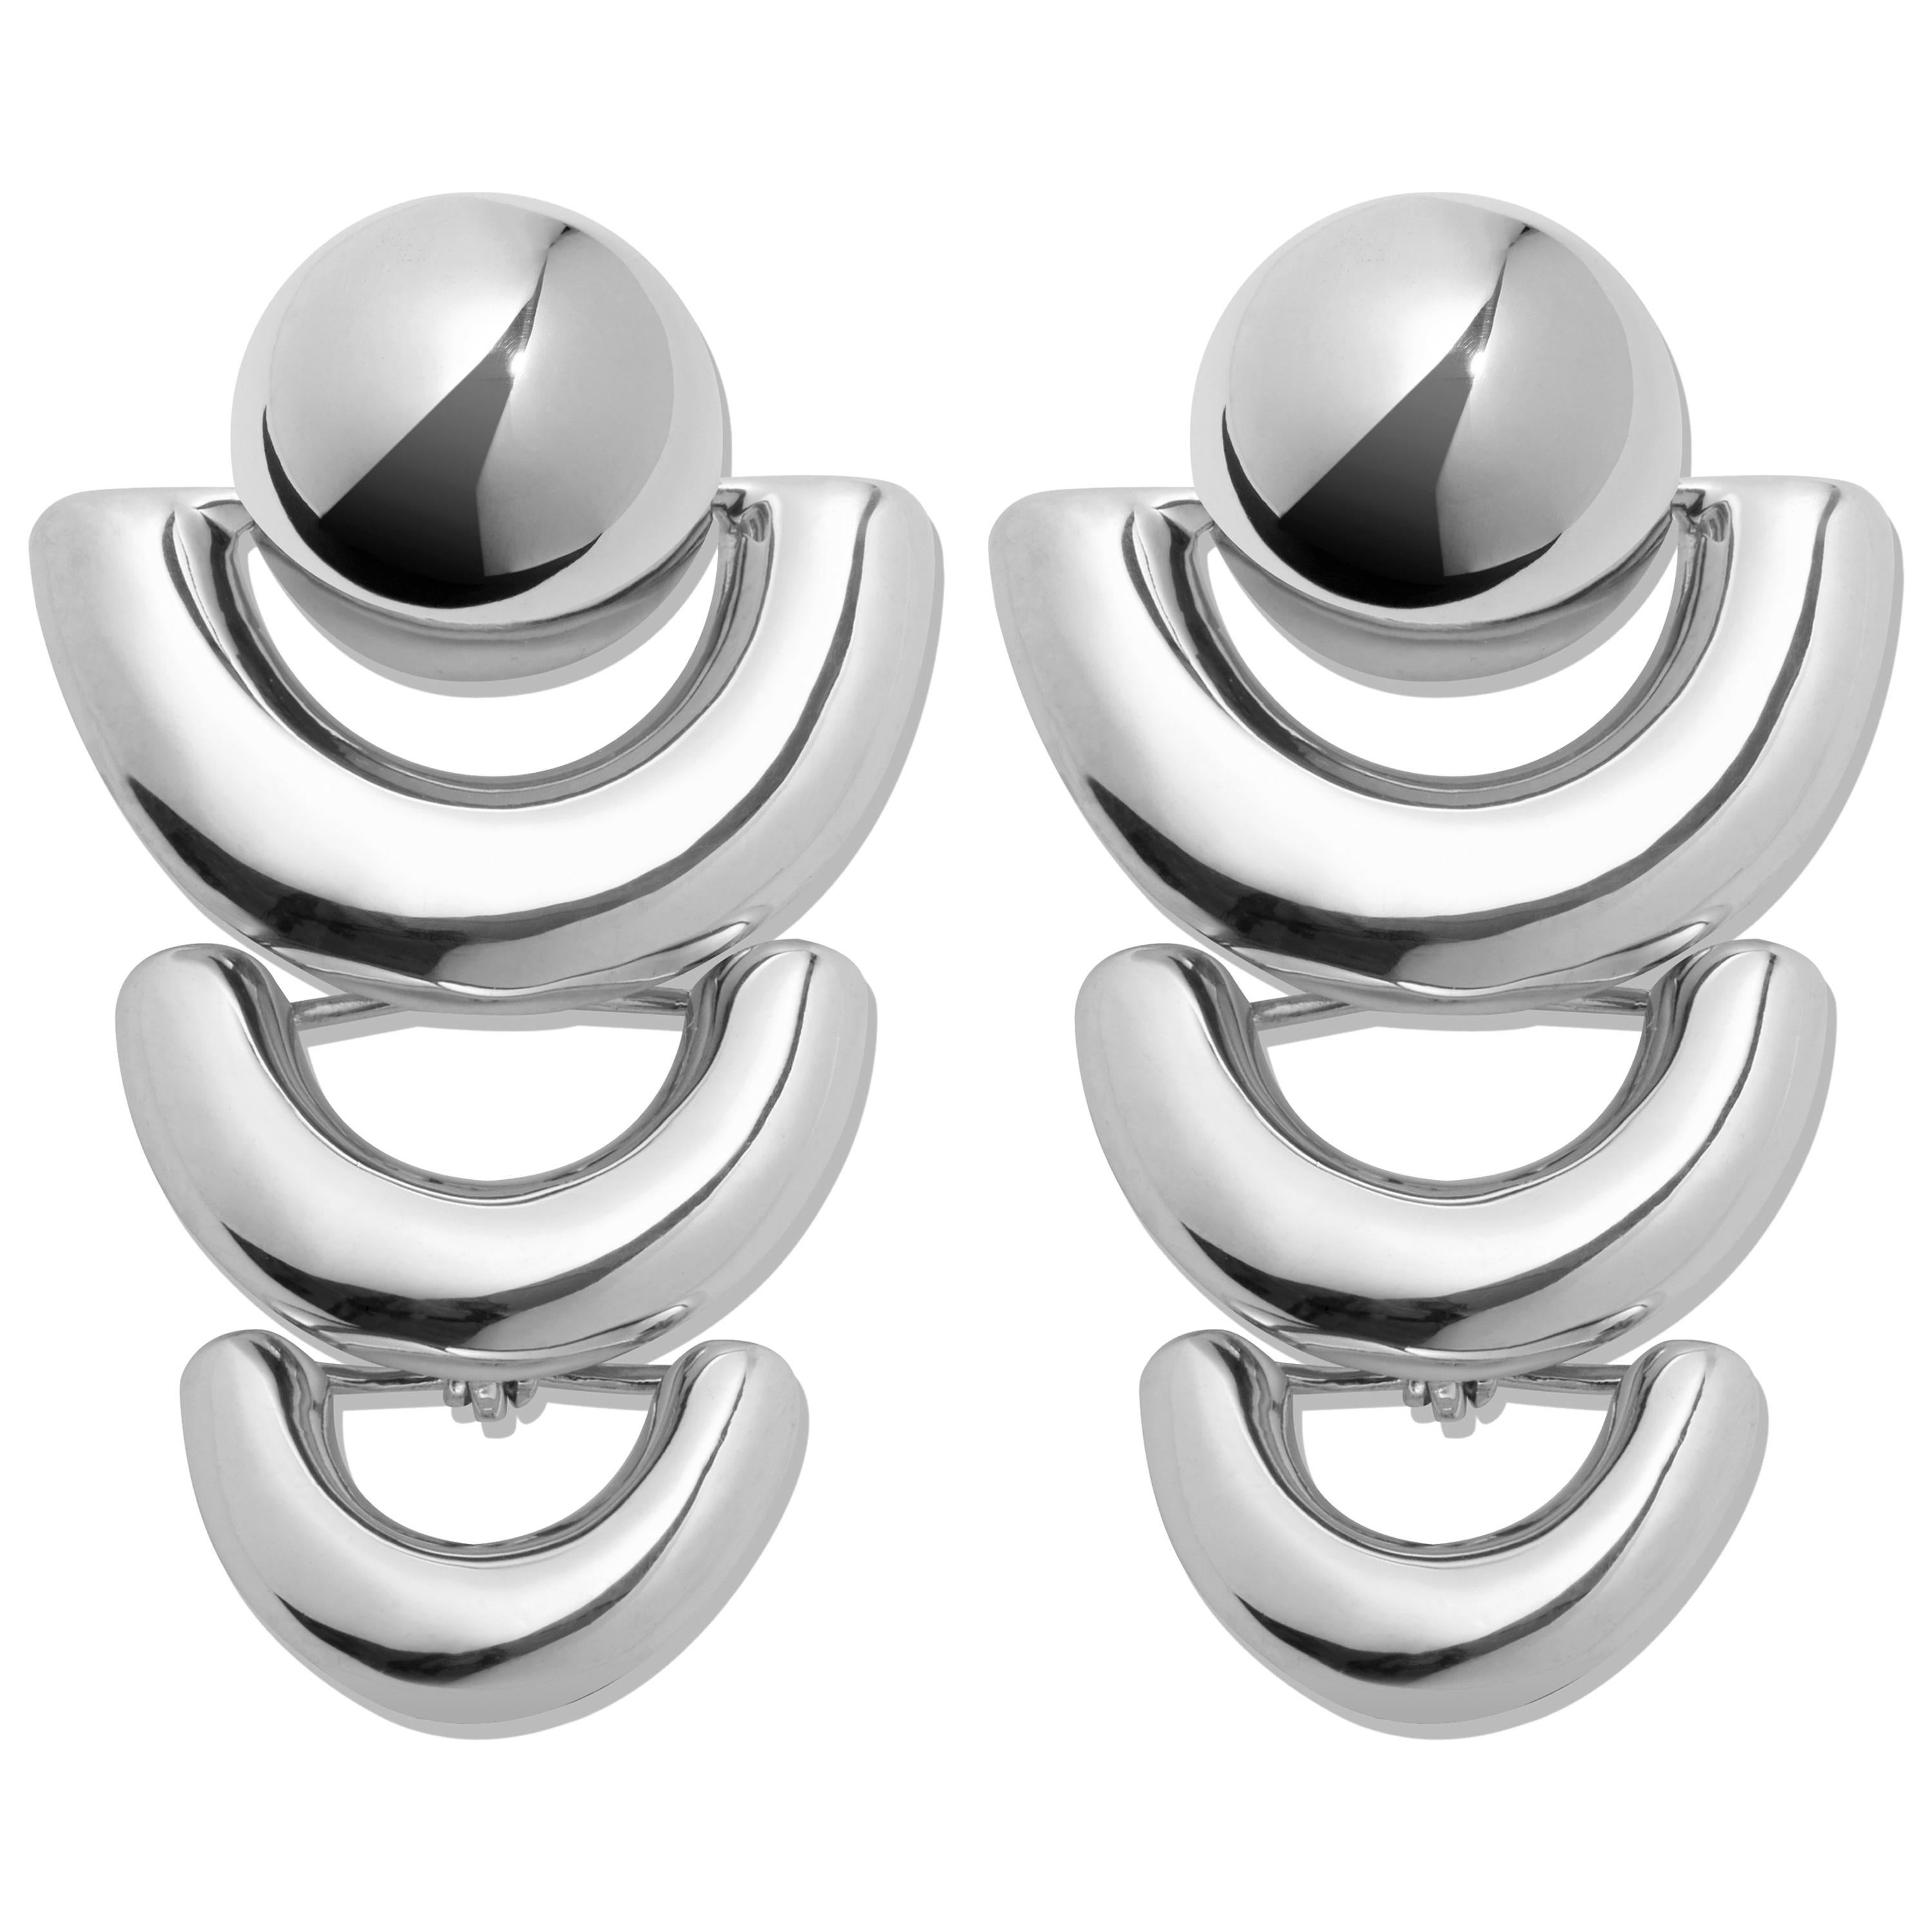 AGMES Sterling Silver Statement Earrings.  
Sterling Silver post.
Matching bracelet available.
Handmade in NYC.  
Inspired by urban landscapes, architecture and modern art, the collection creates a feminine geometry expressed through clean lines and